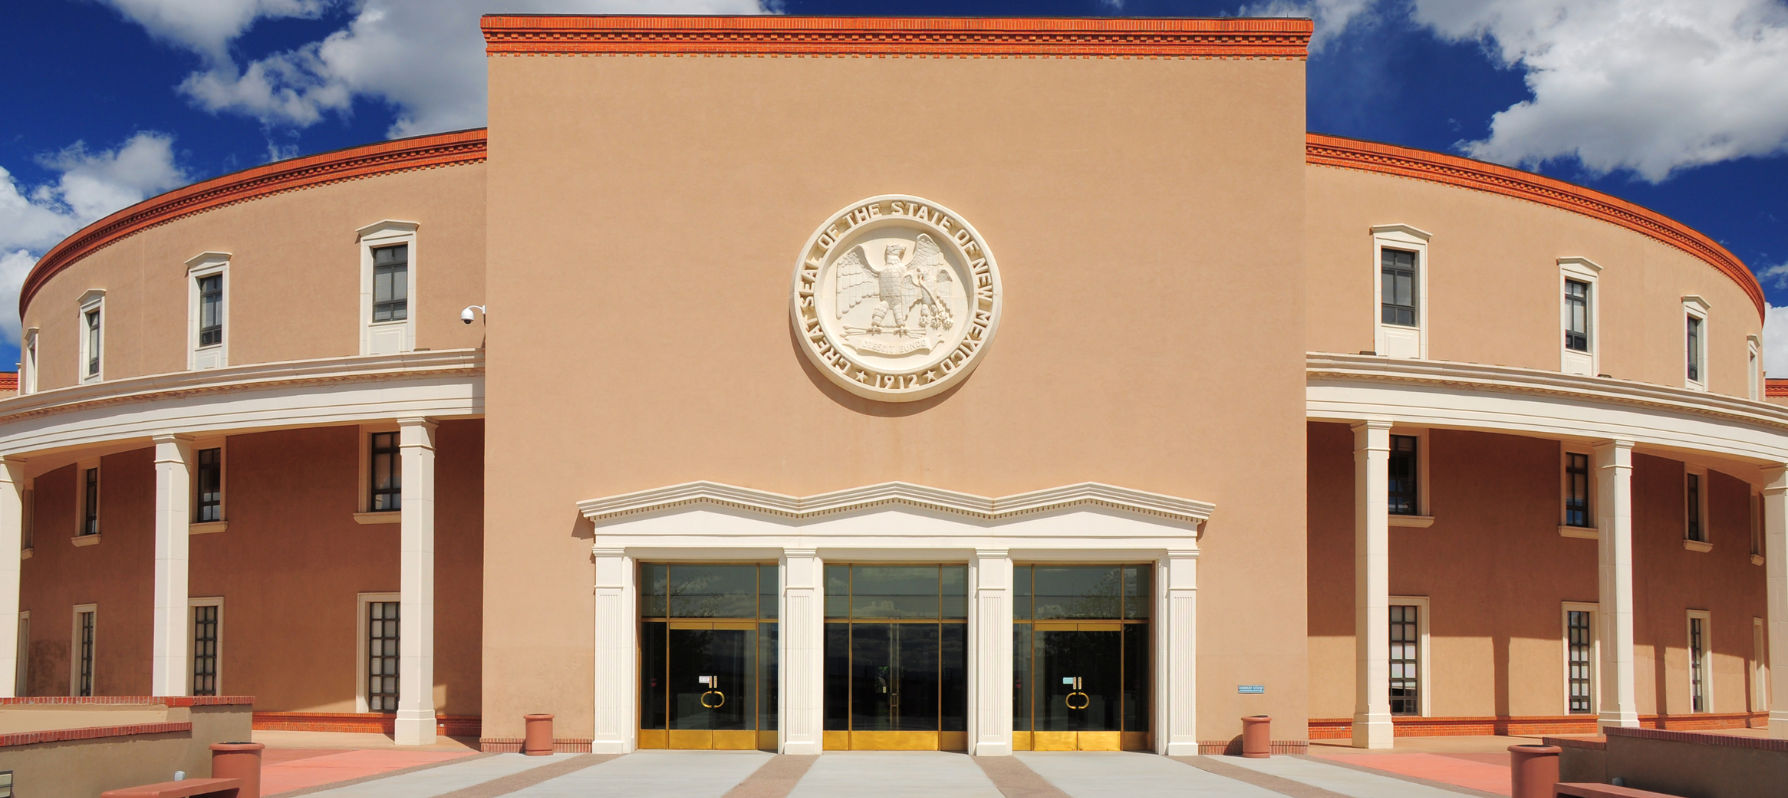 New Mexico state administrative building